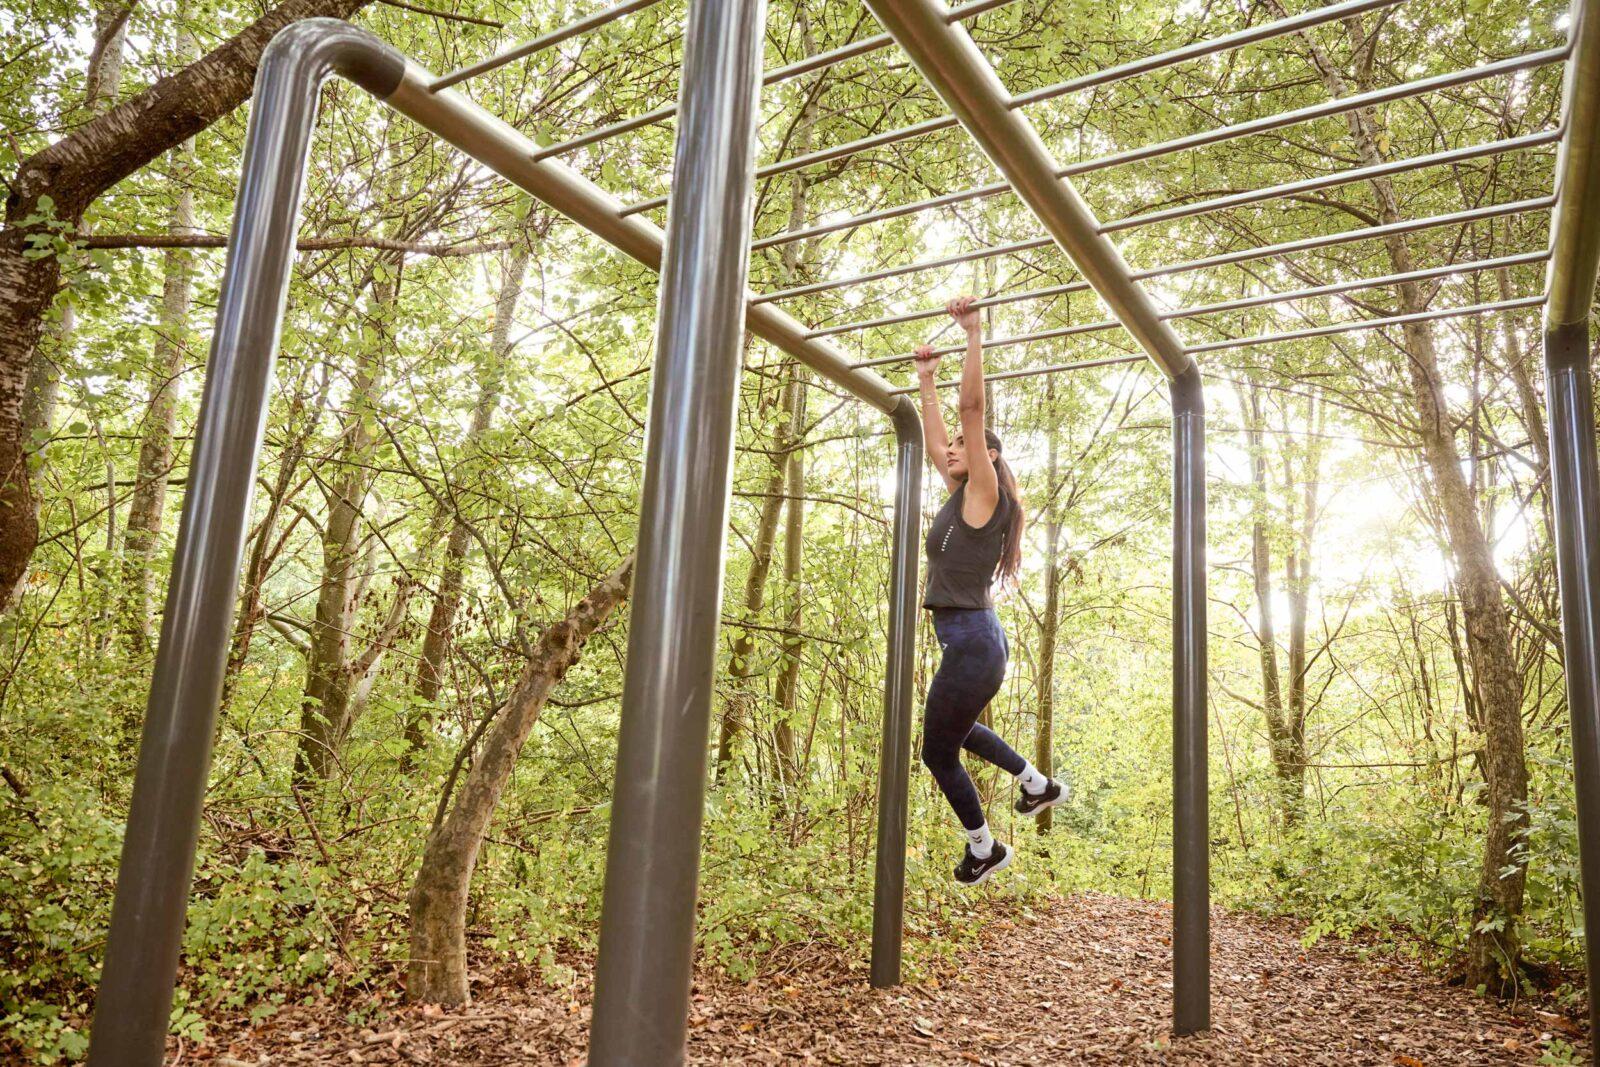 Horizontal Ladder Double - Outdoor obstacles to train for free and without limitations